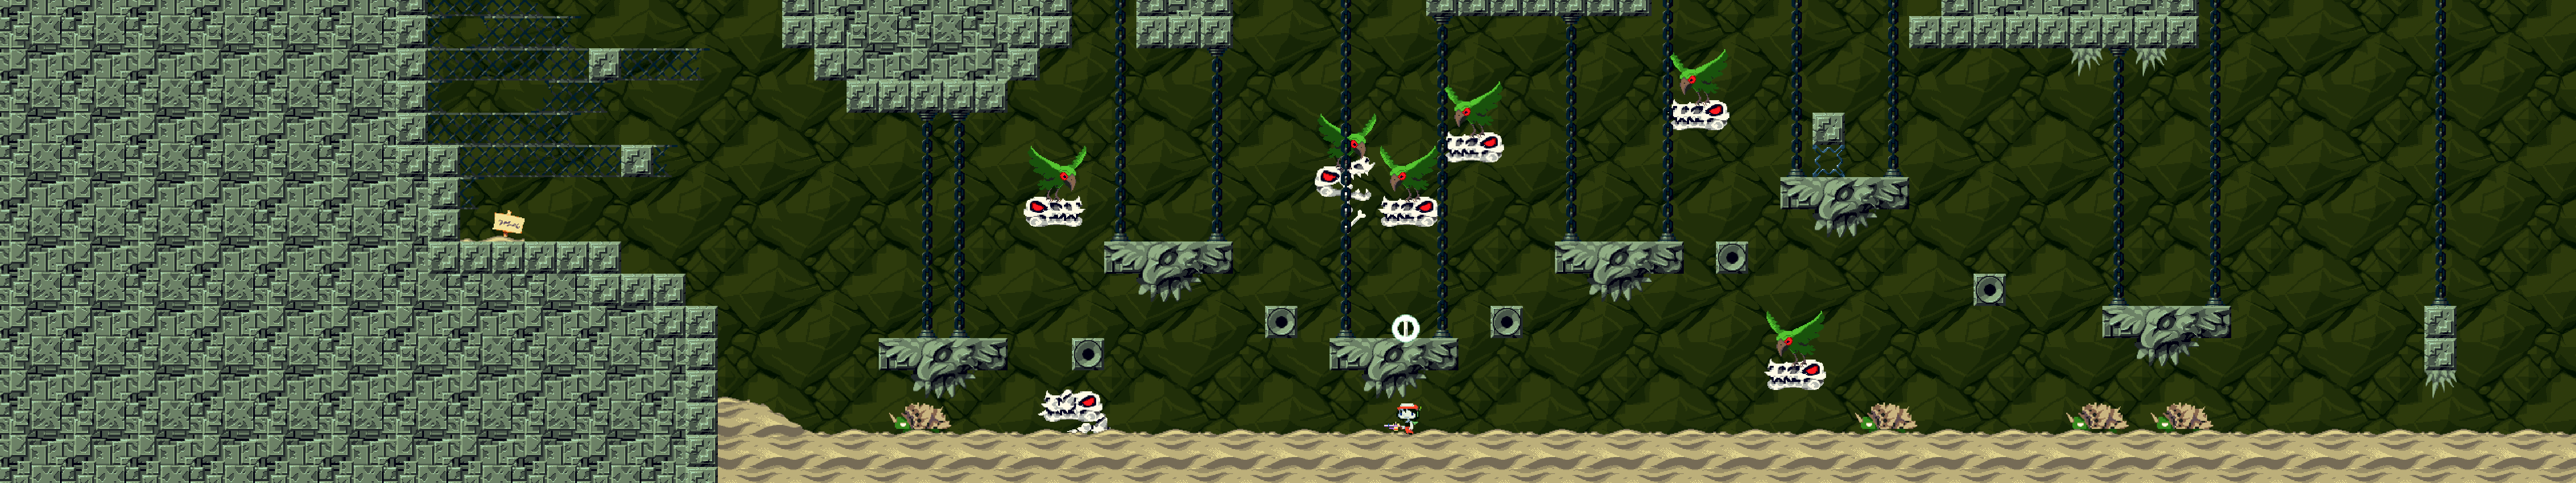 Cave Story - Sand Zone "Three-Monitor Wallpaper"